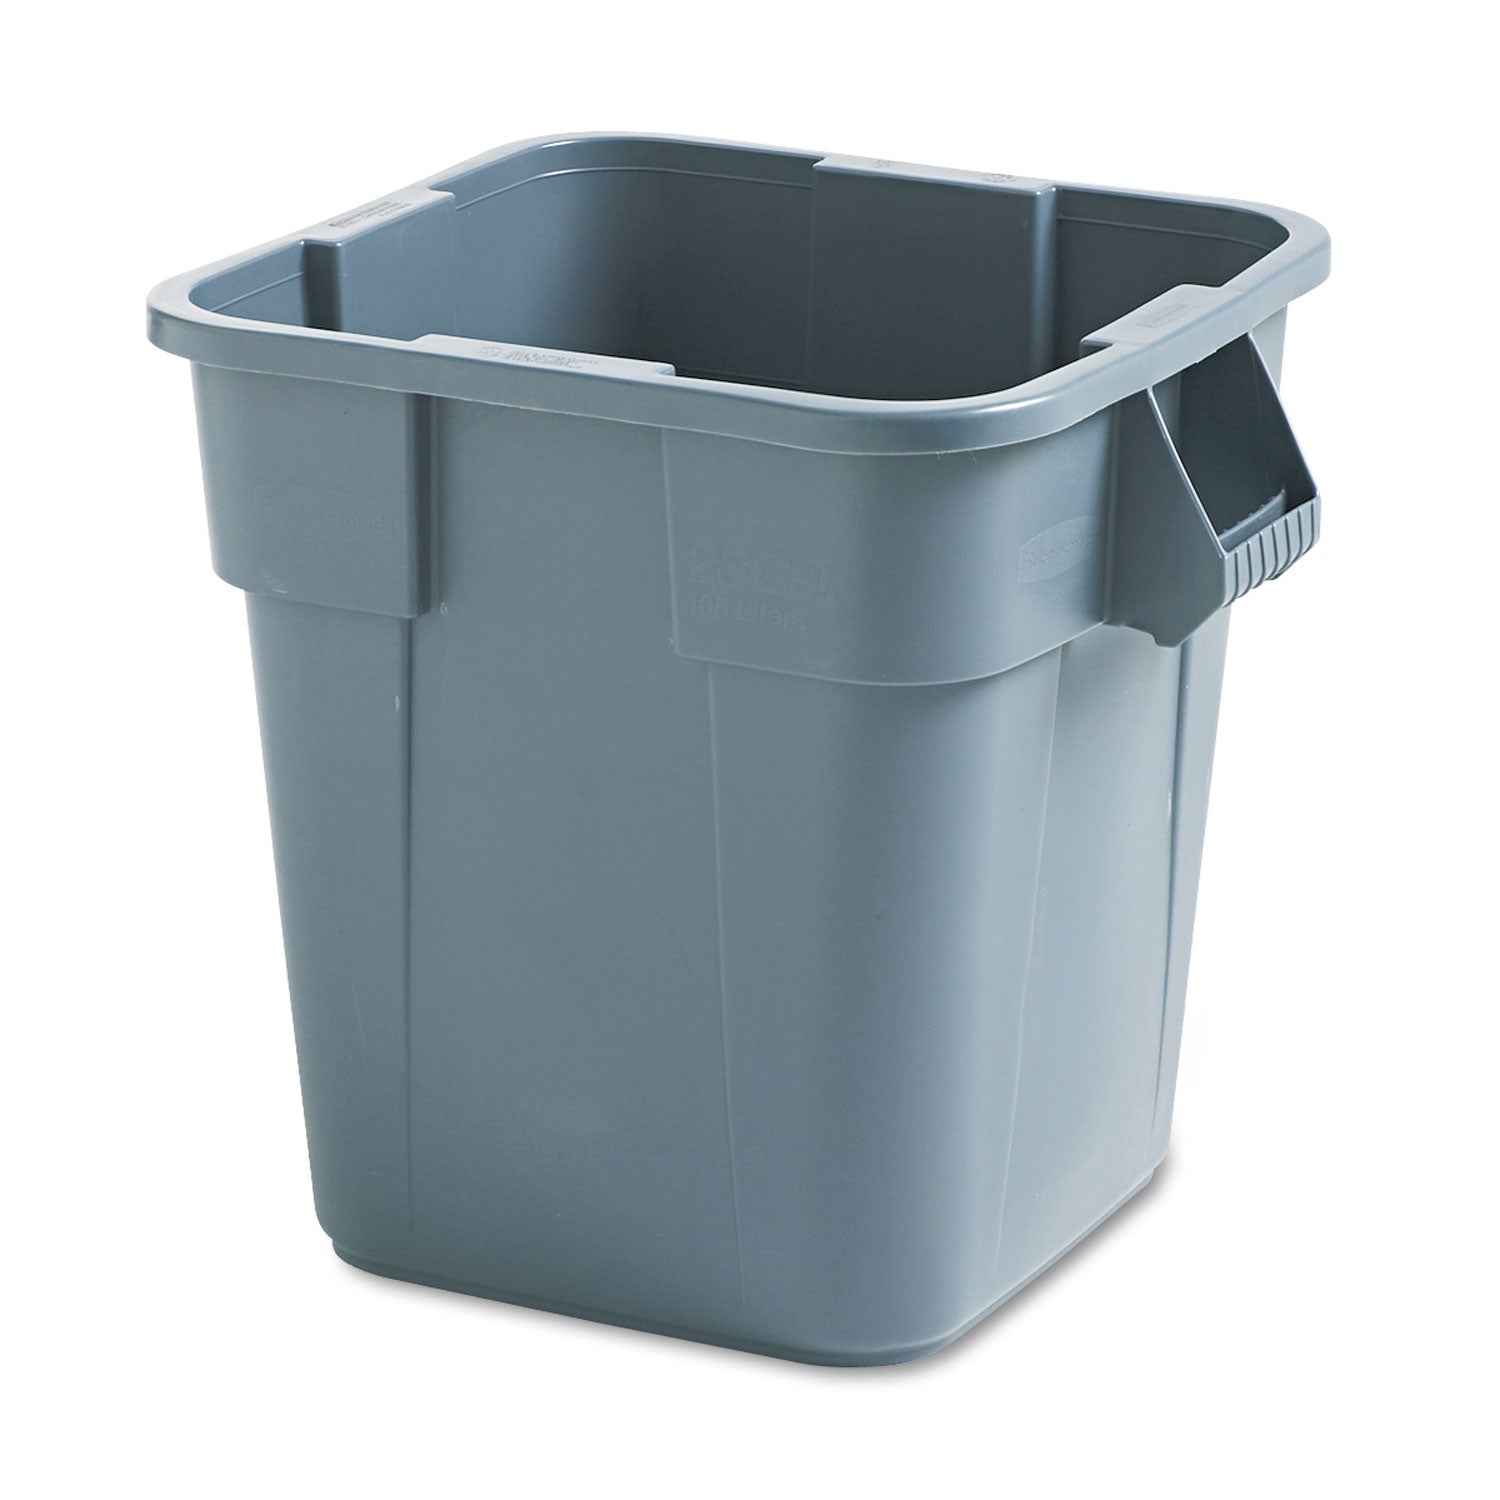 Square Brute Container, 28 gal, Polyethylene, Gray - 